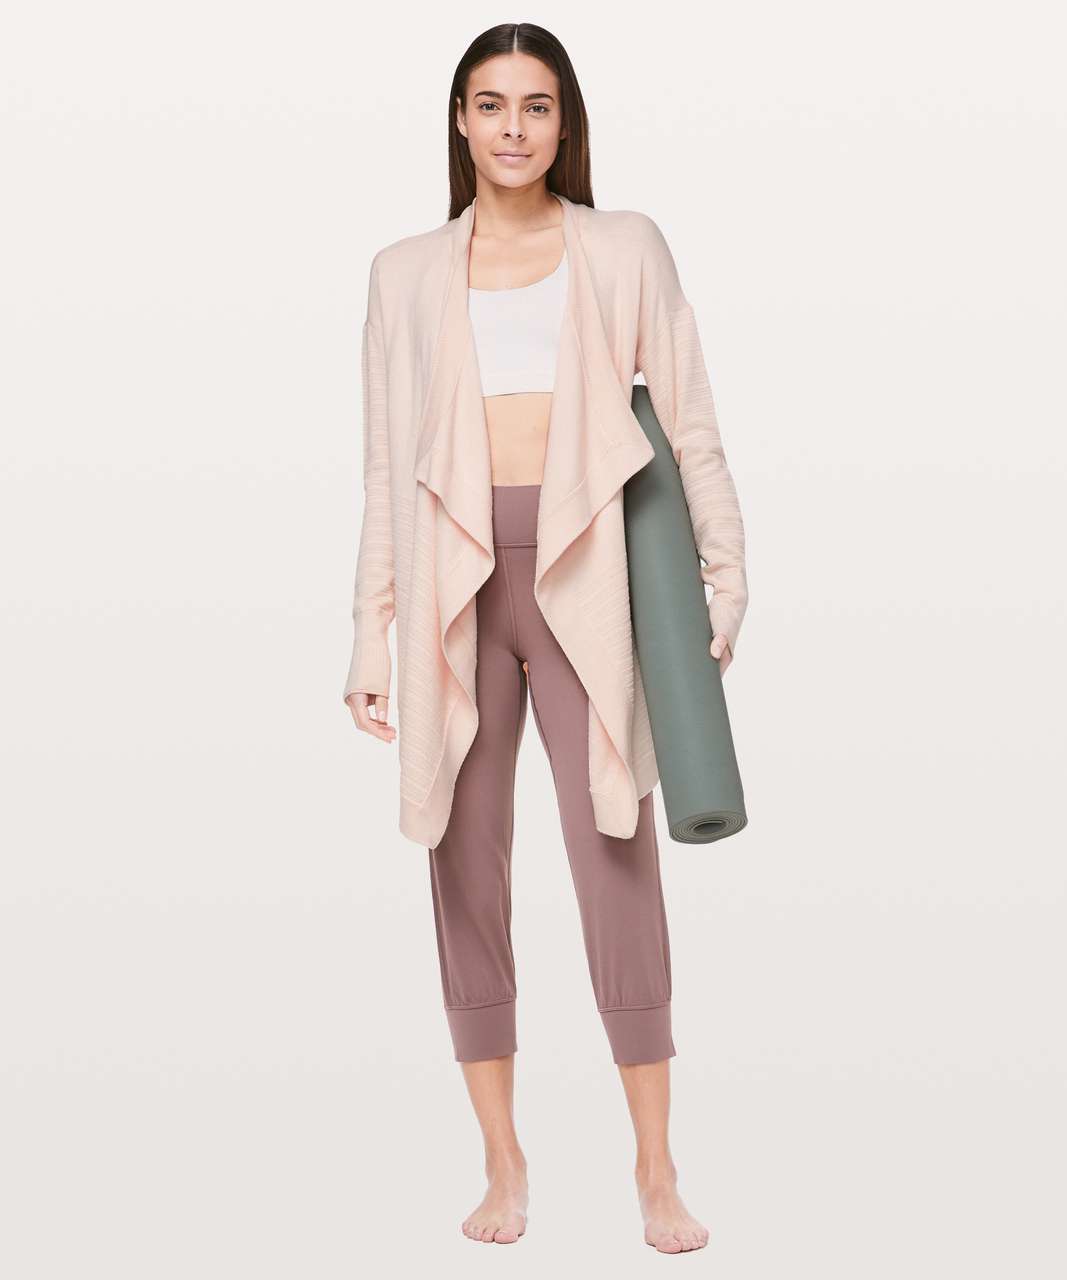 Lululemon Find Your Calm Wrap - Chantilly